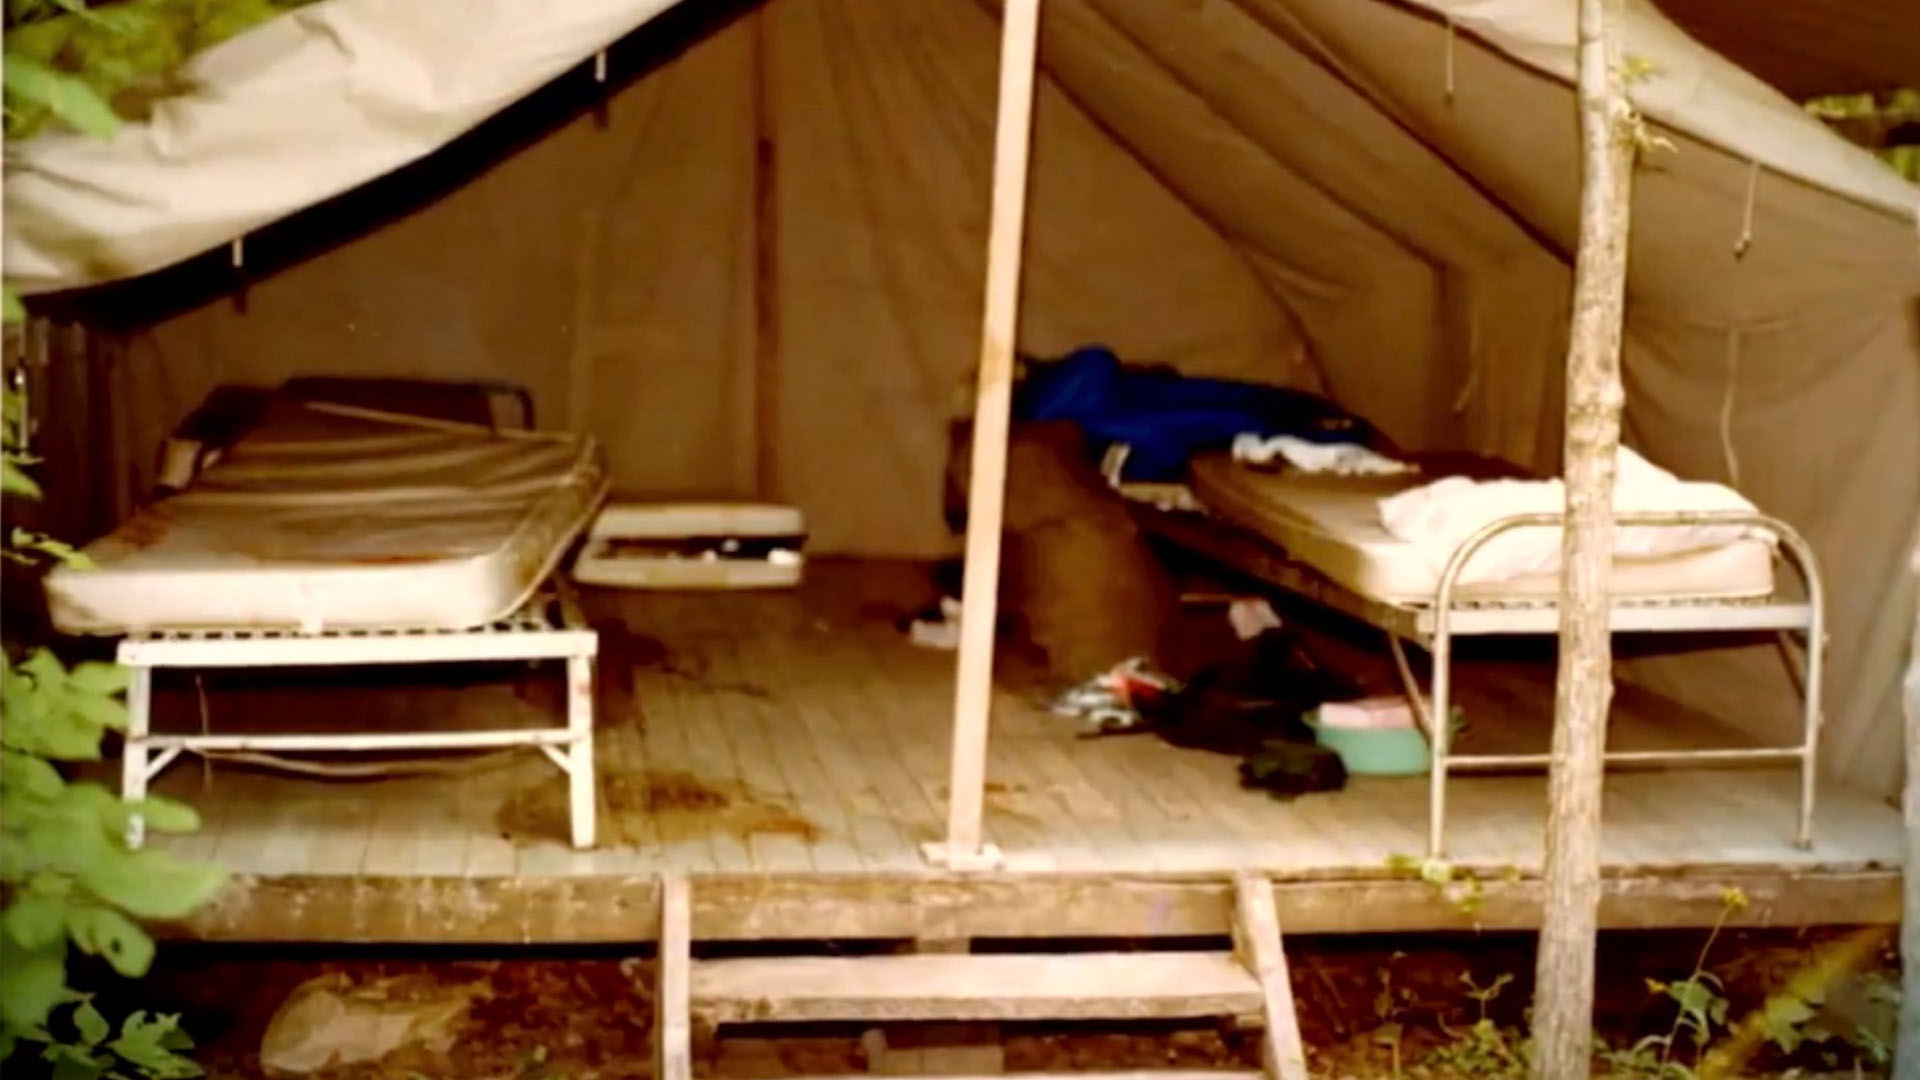 Horror pics of bloodsoaked tent after Oklahoma Girl Scout Murders